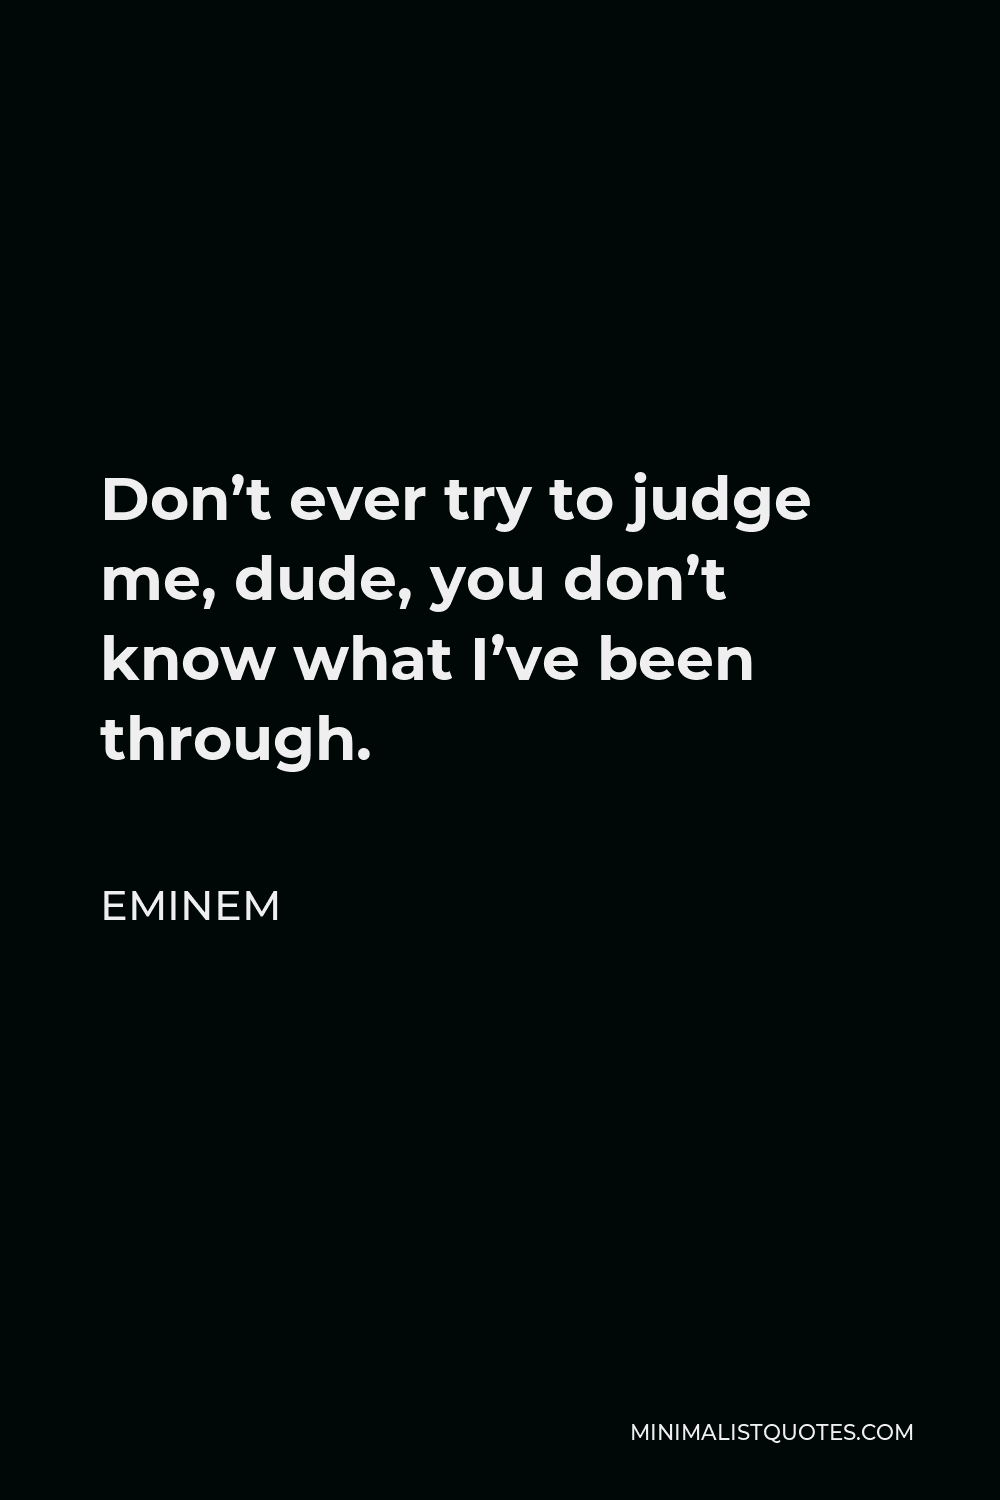 Eminem Quote: Don't ever try to judge me, dude, you don't know what I've been through